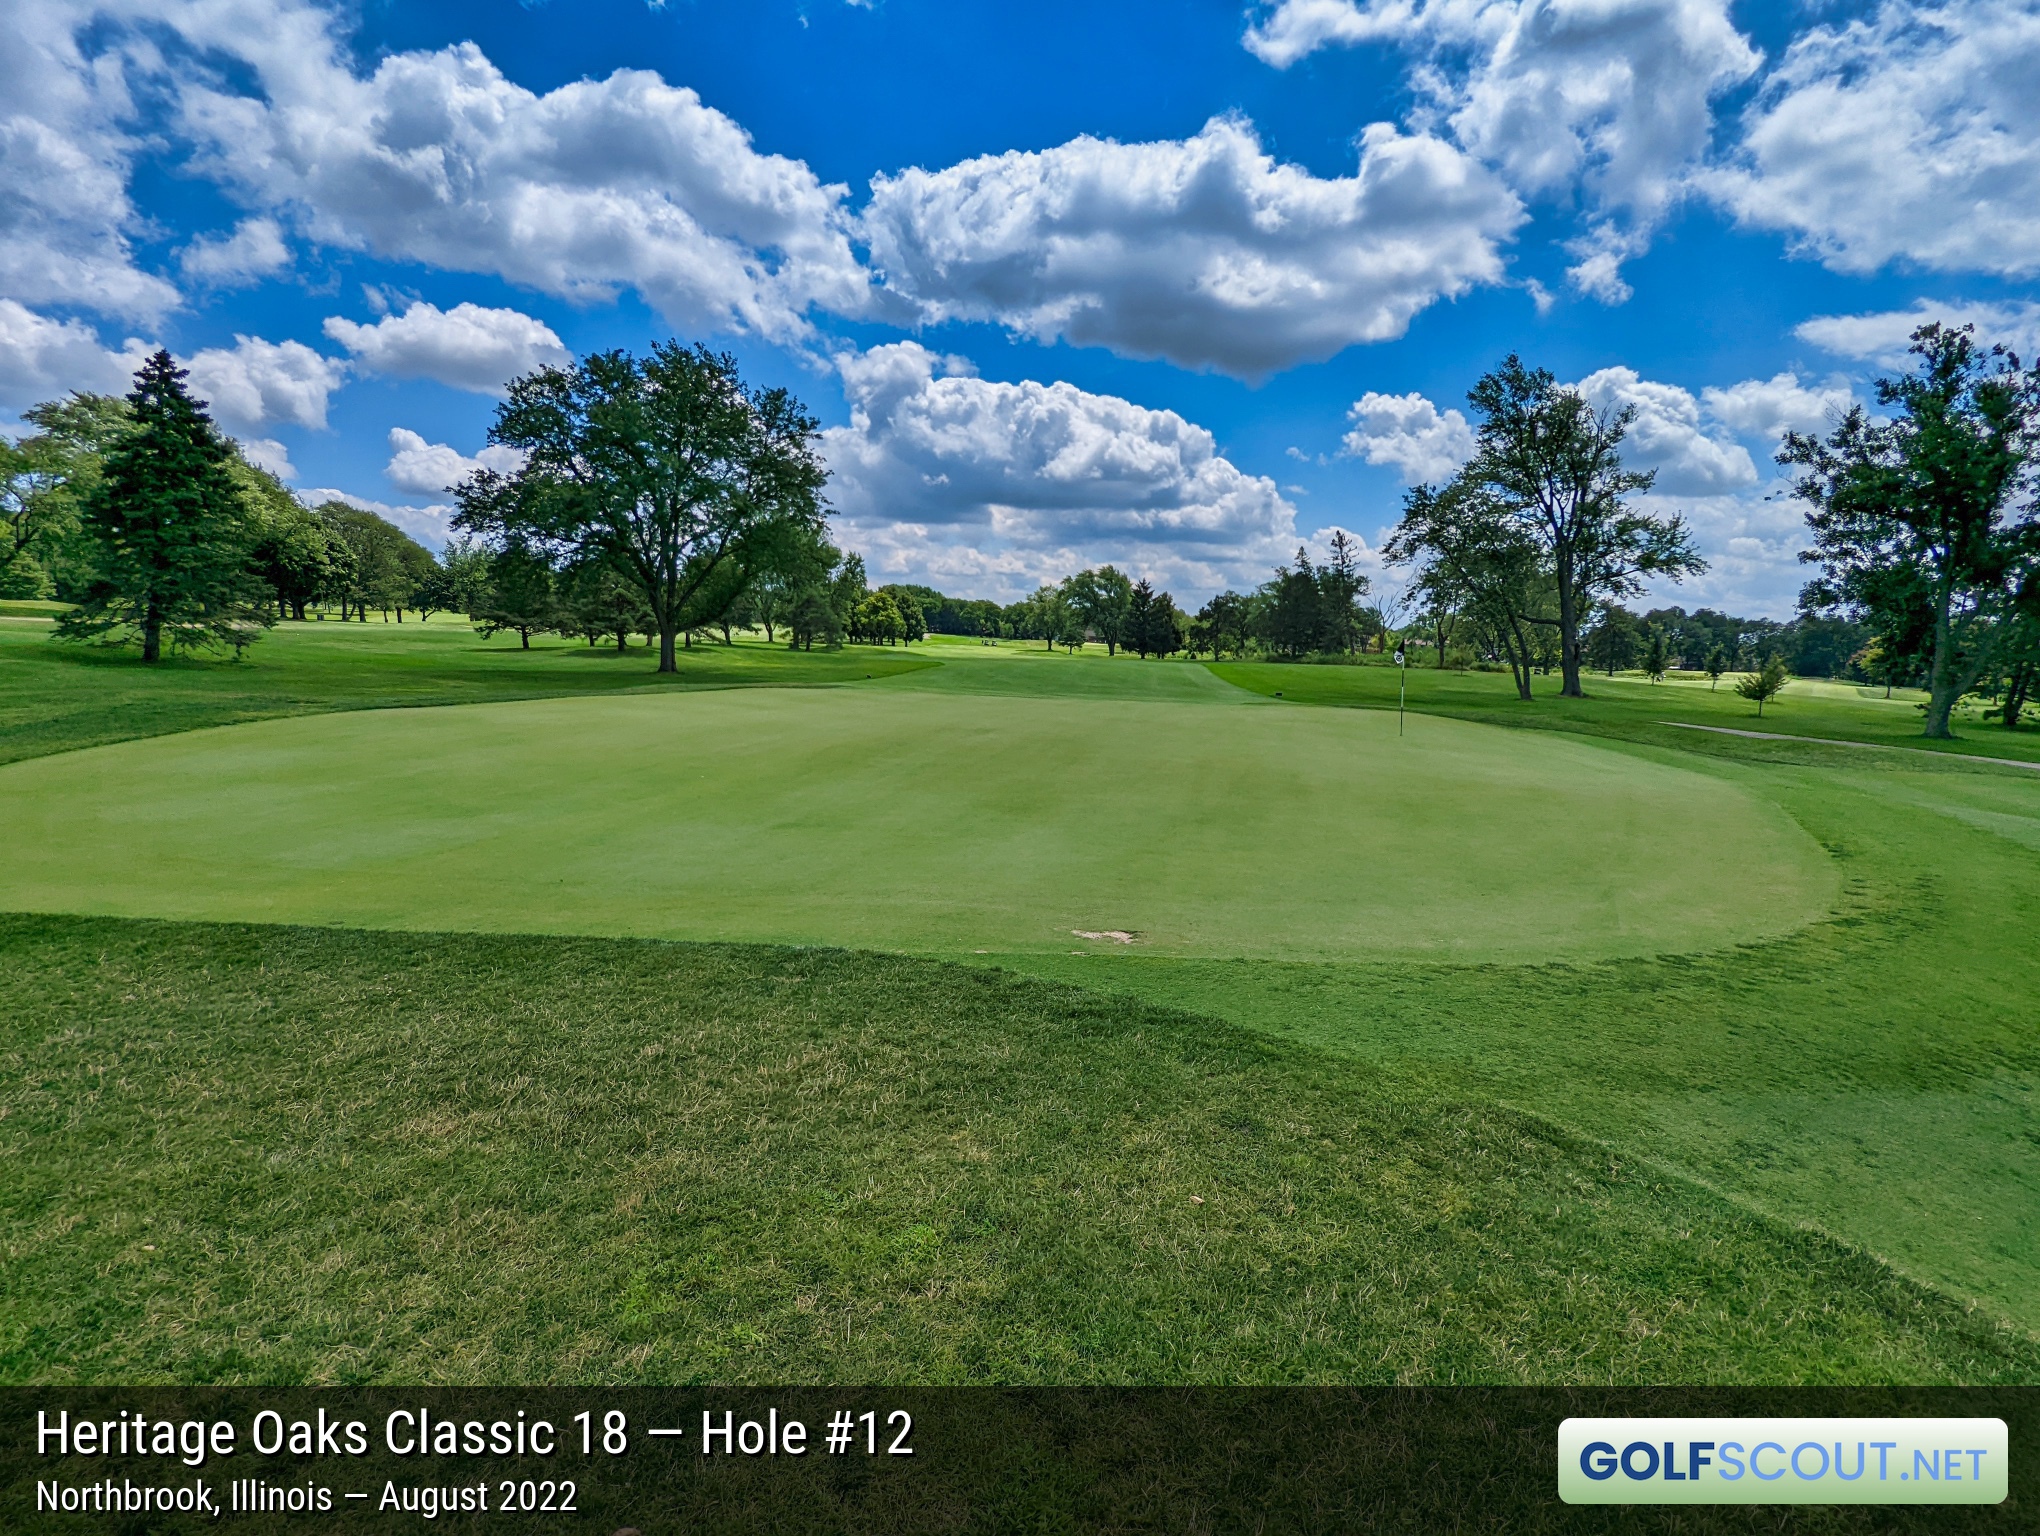 Photo of hole #12 at Heritage Oaks Golf Club - Classic 18 in Northbrook, Illinois. 